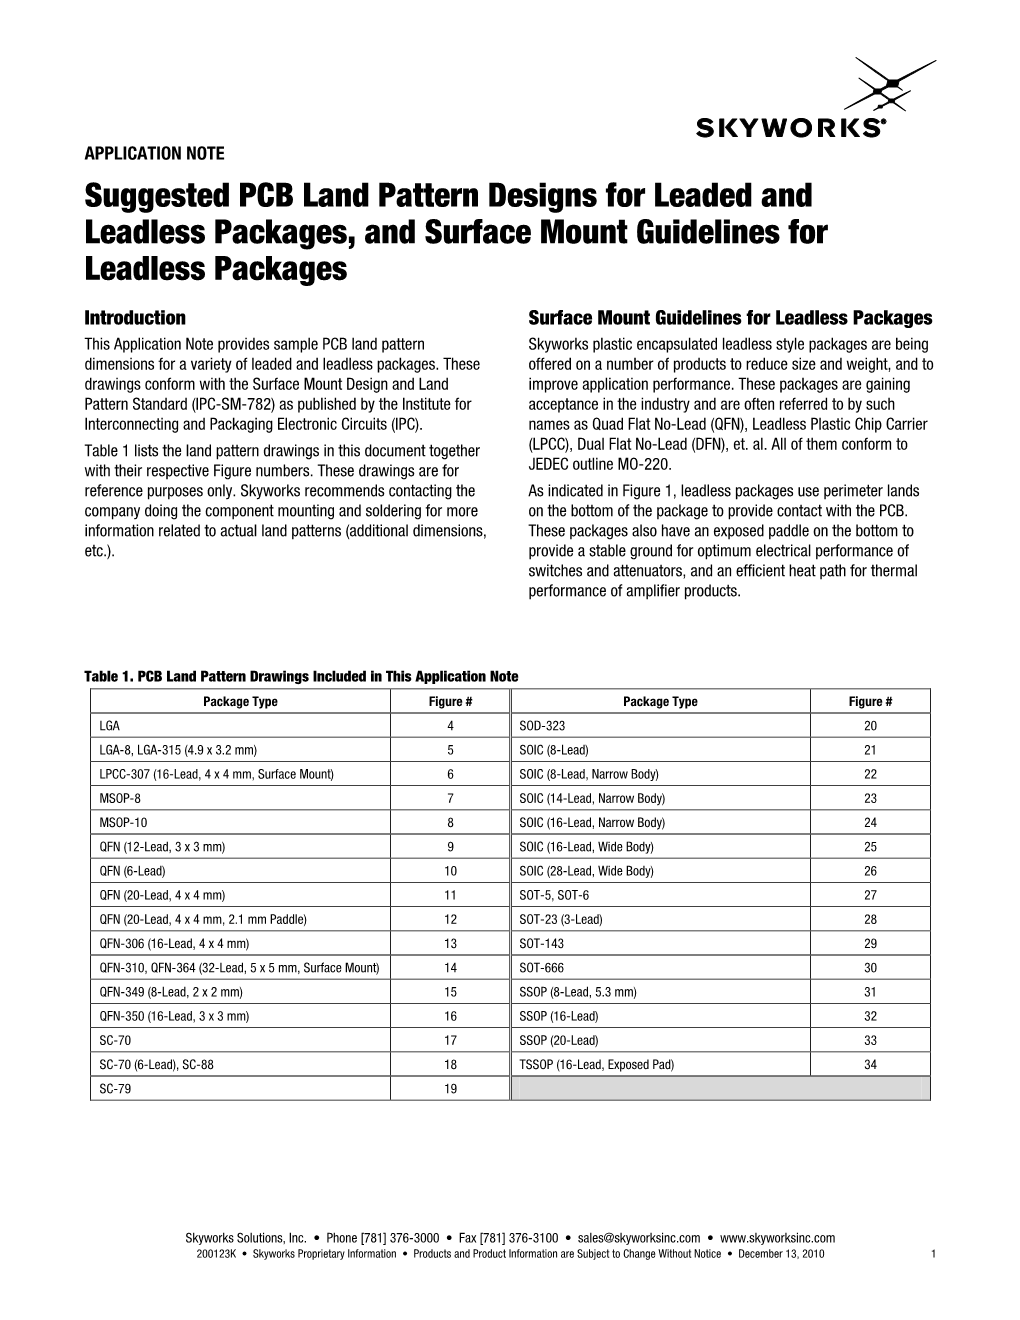 Suggested PCB Land Pattern Designs for Leaded and Leadless Packages, and Surface Mount Guidelines for Leadless Packages